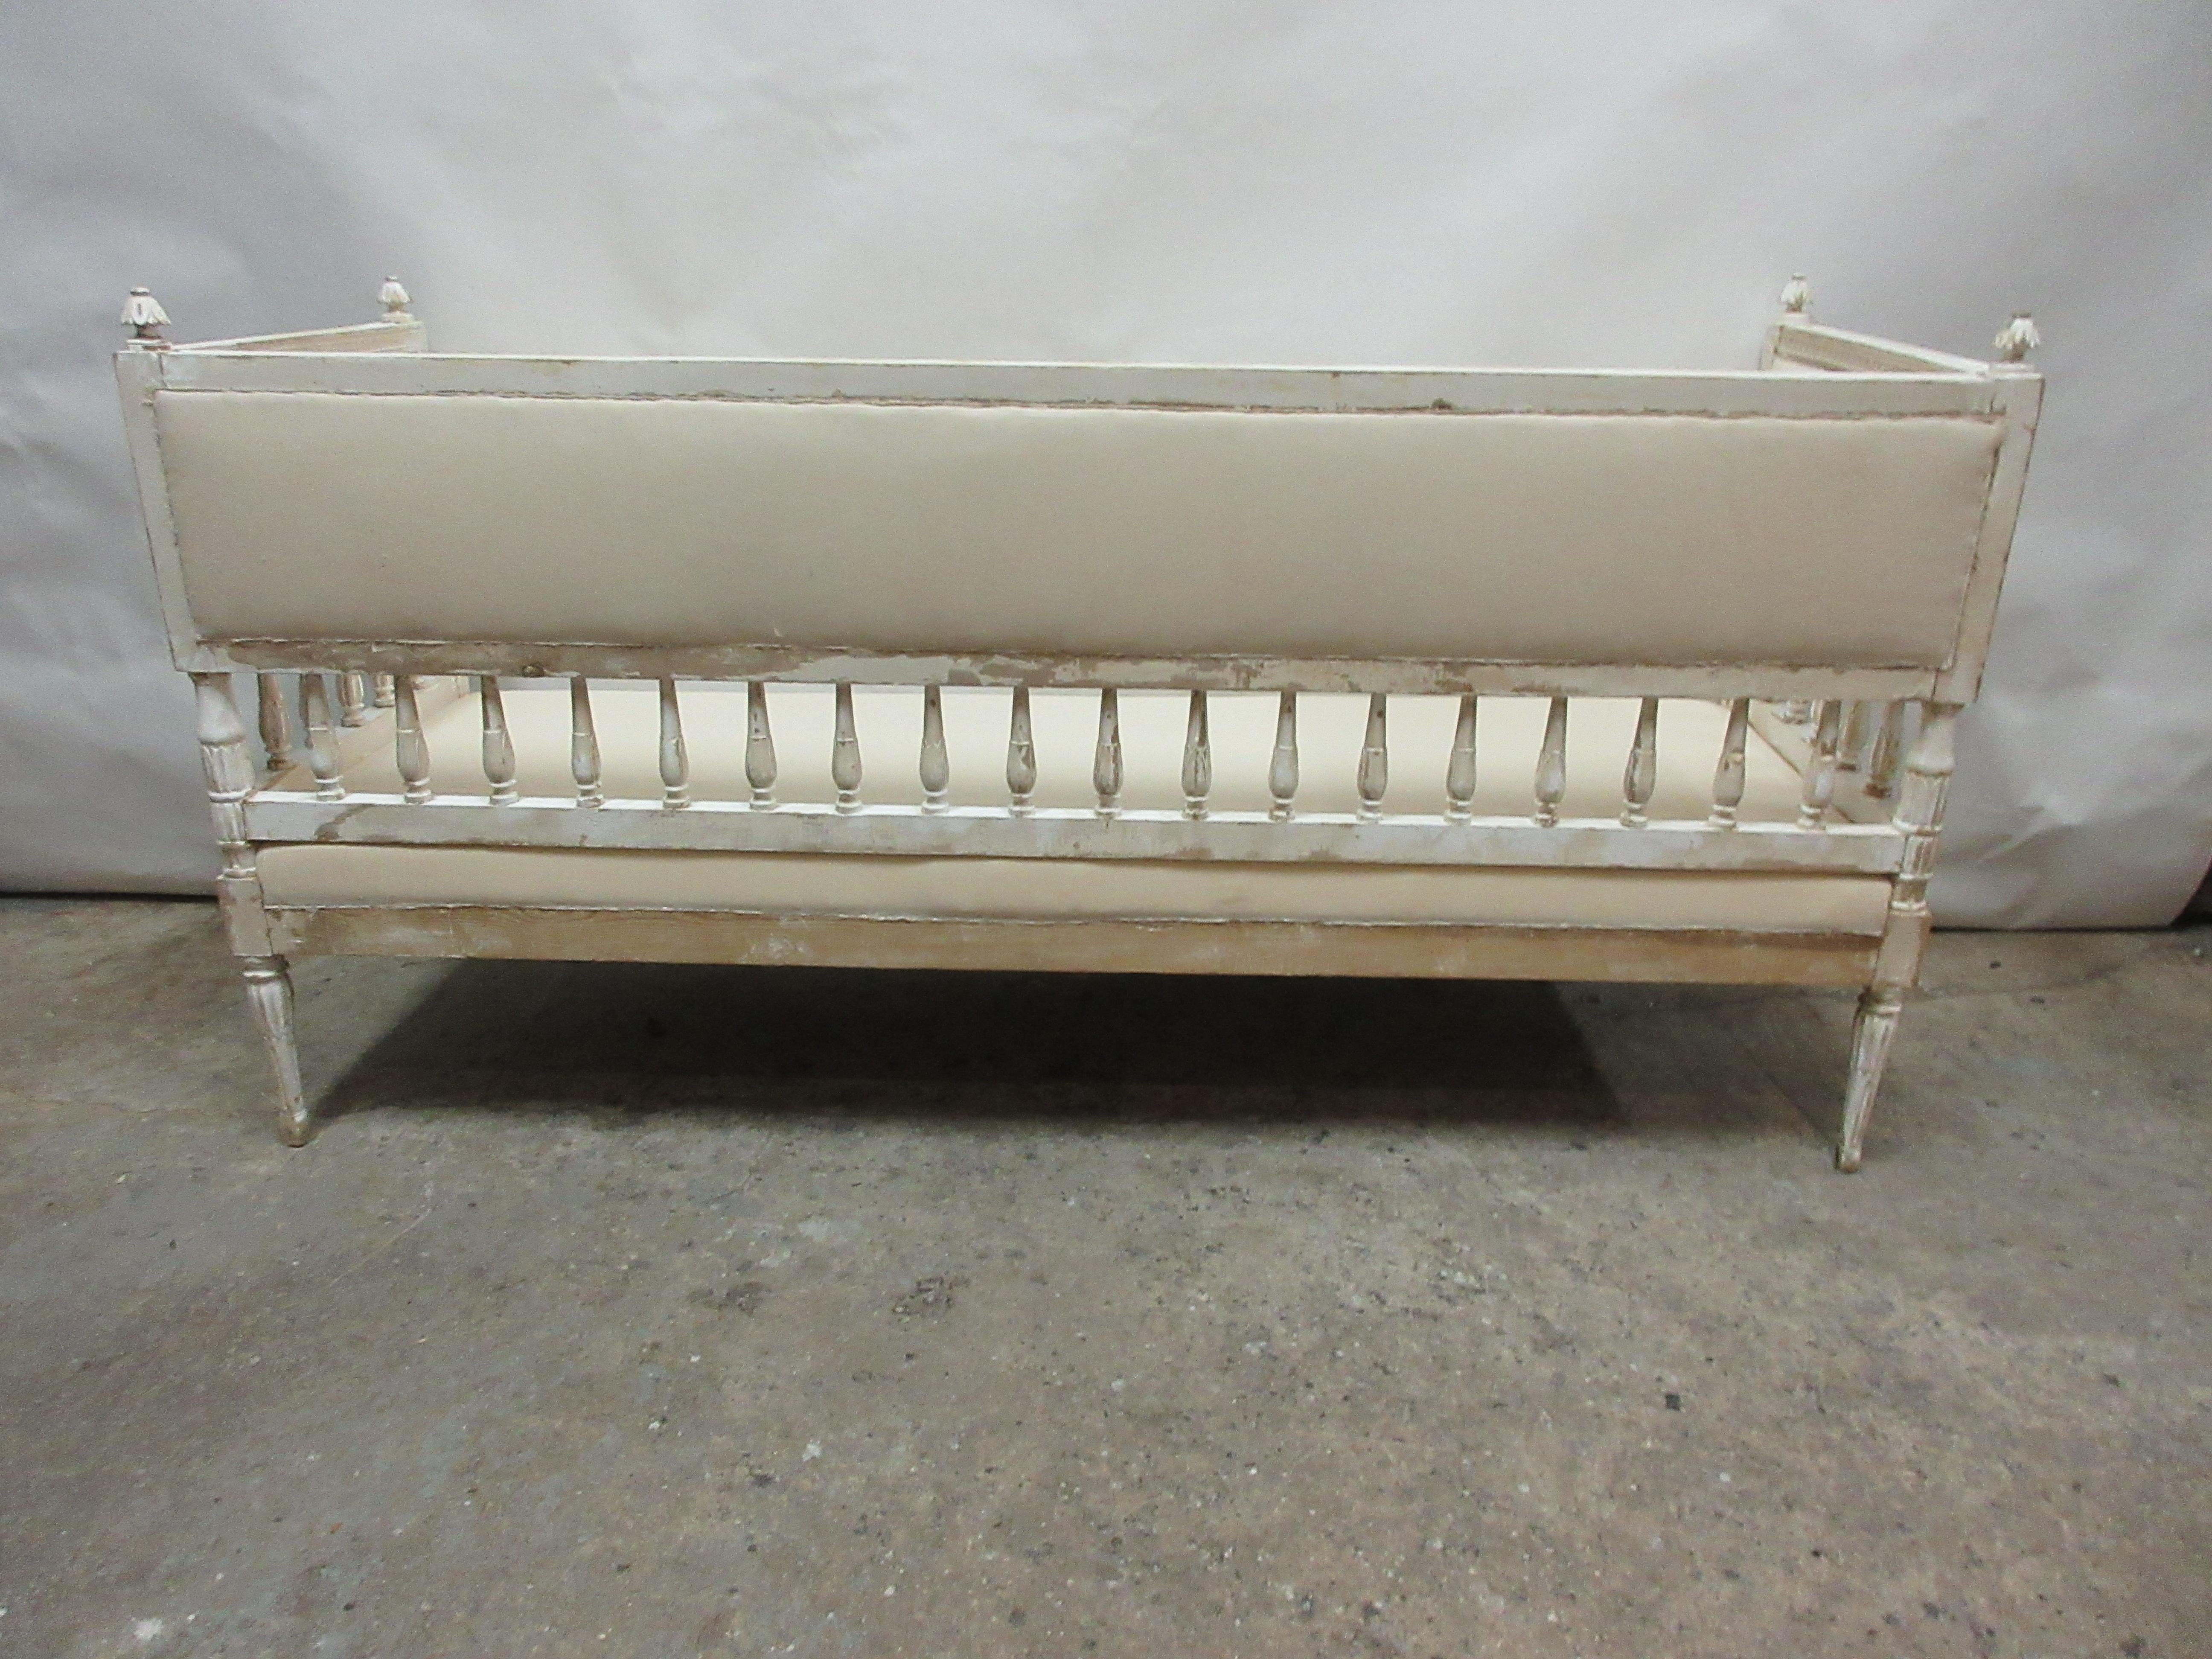 This is a 100% original painted Swedish Gustavian sofa. The seating has been restored and recovered in Muslin.